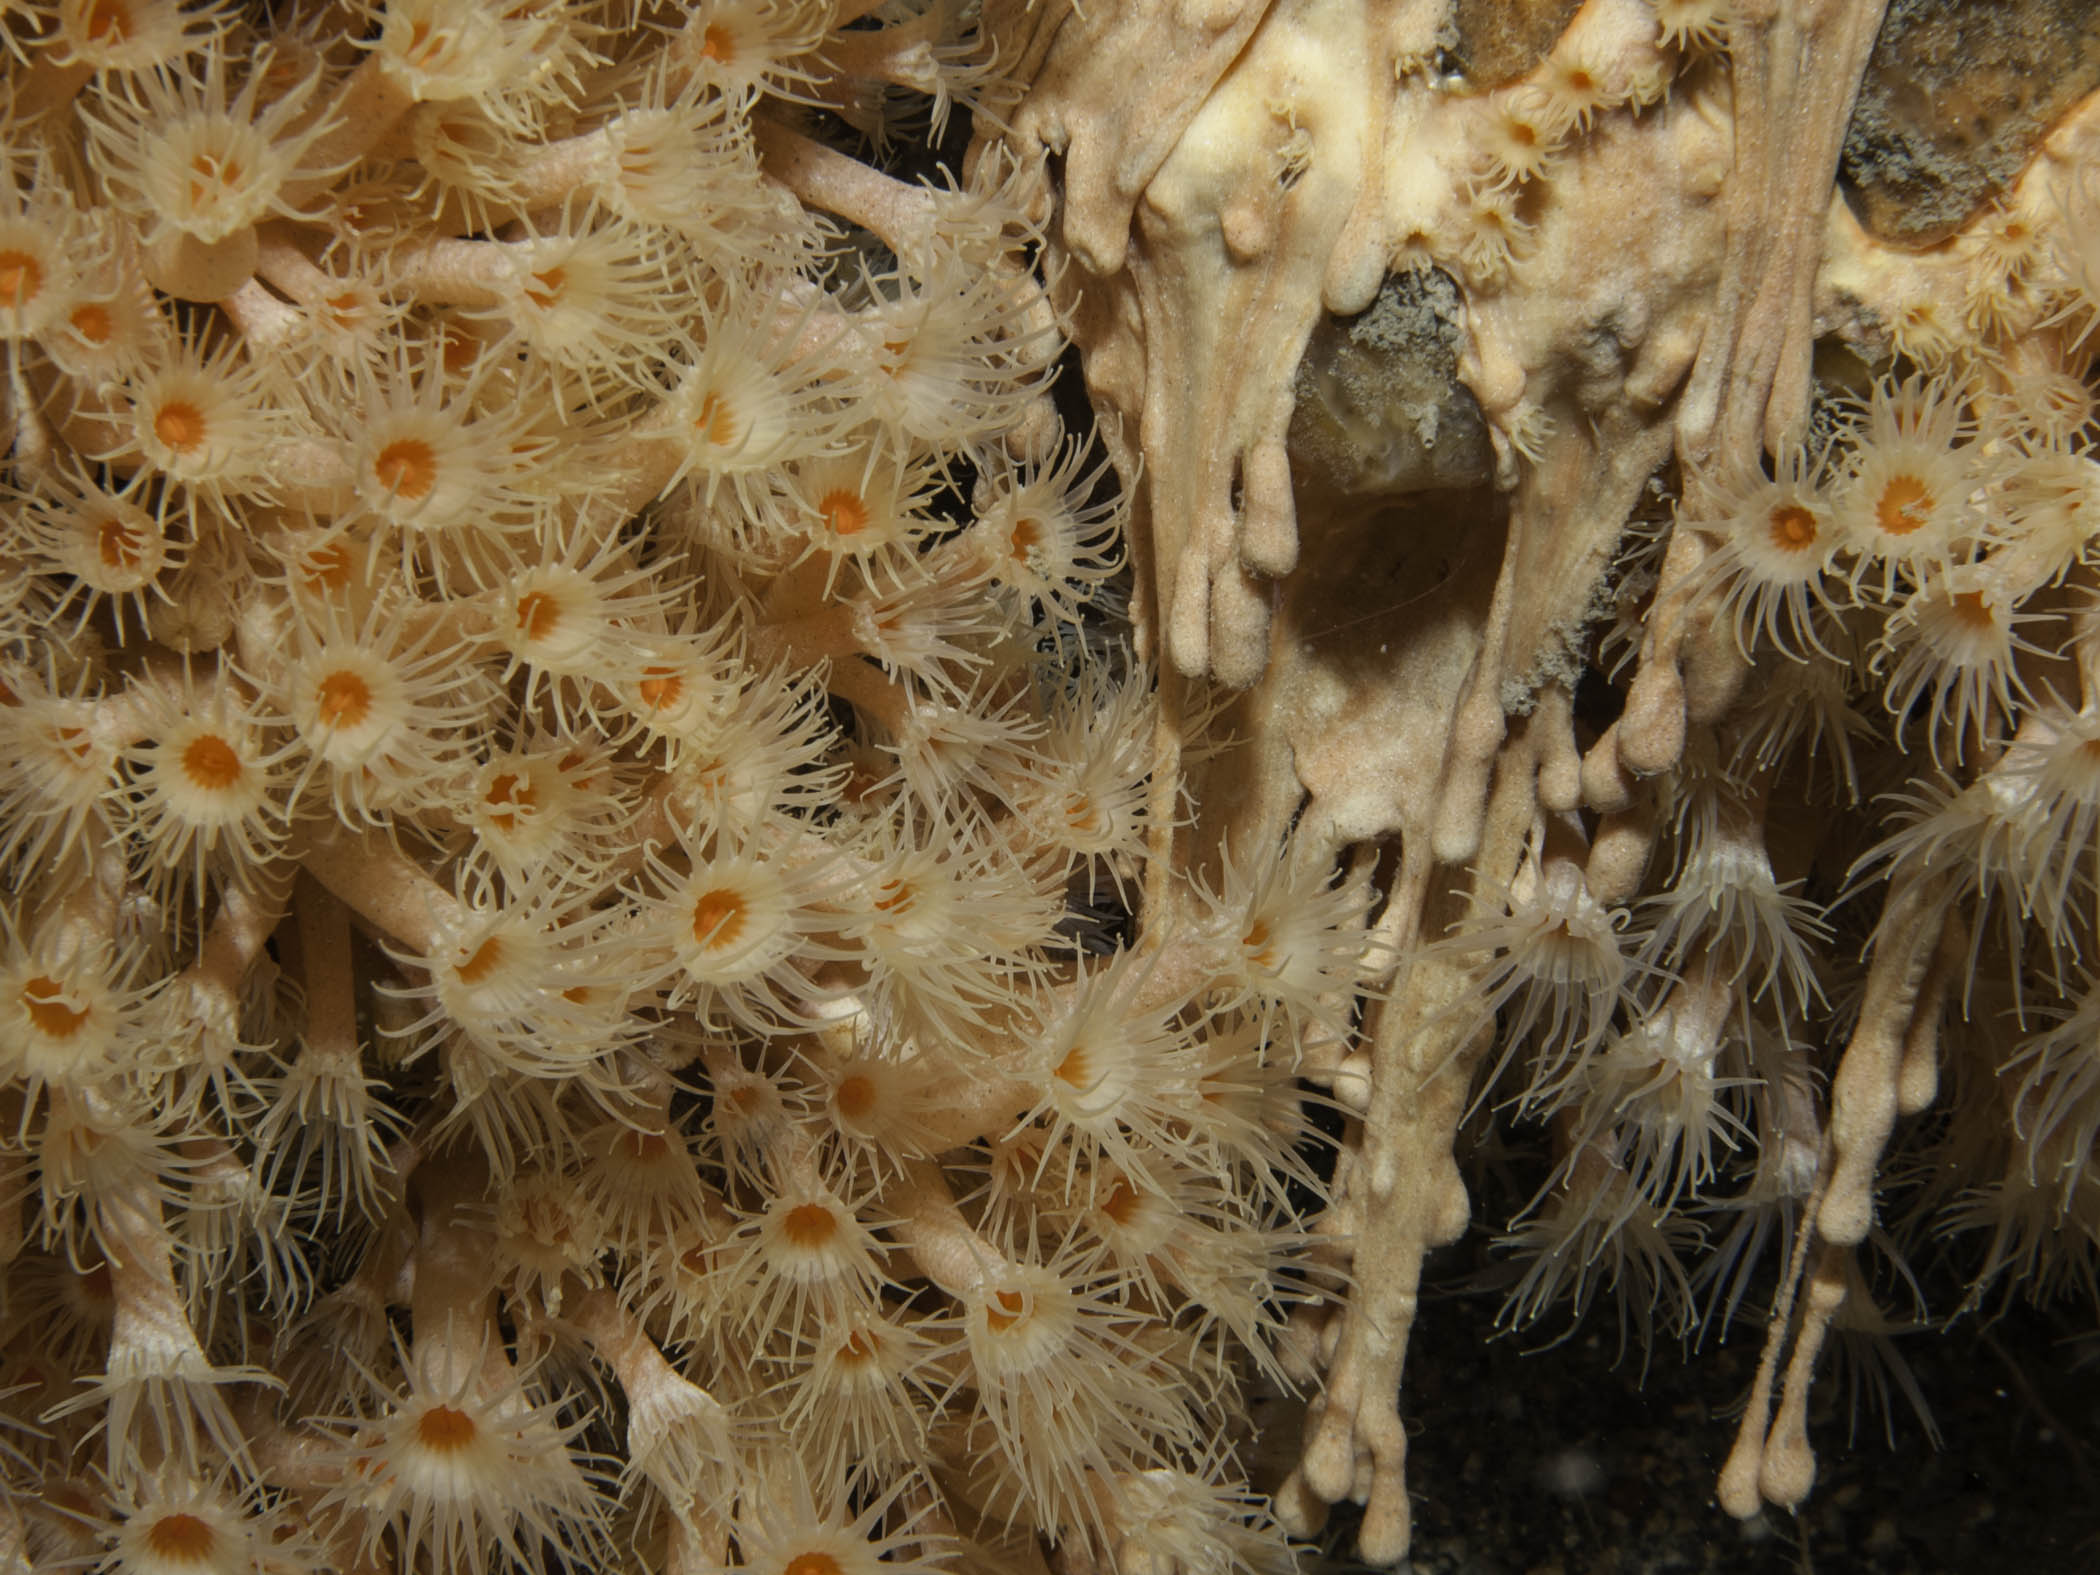 image: Parazoanthus axinellae. Right-hand side shows colony undergoing asexual reproduction, Rathlin Island, 2005.